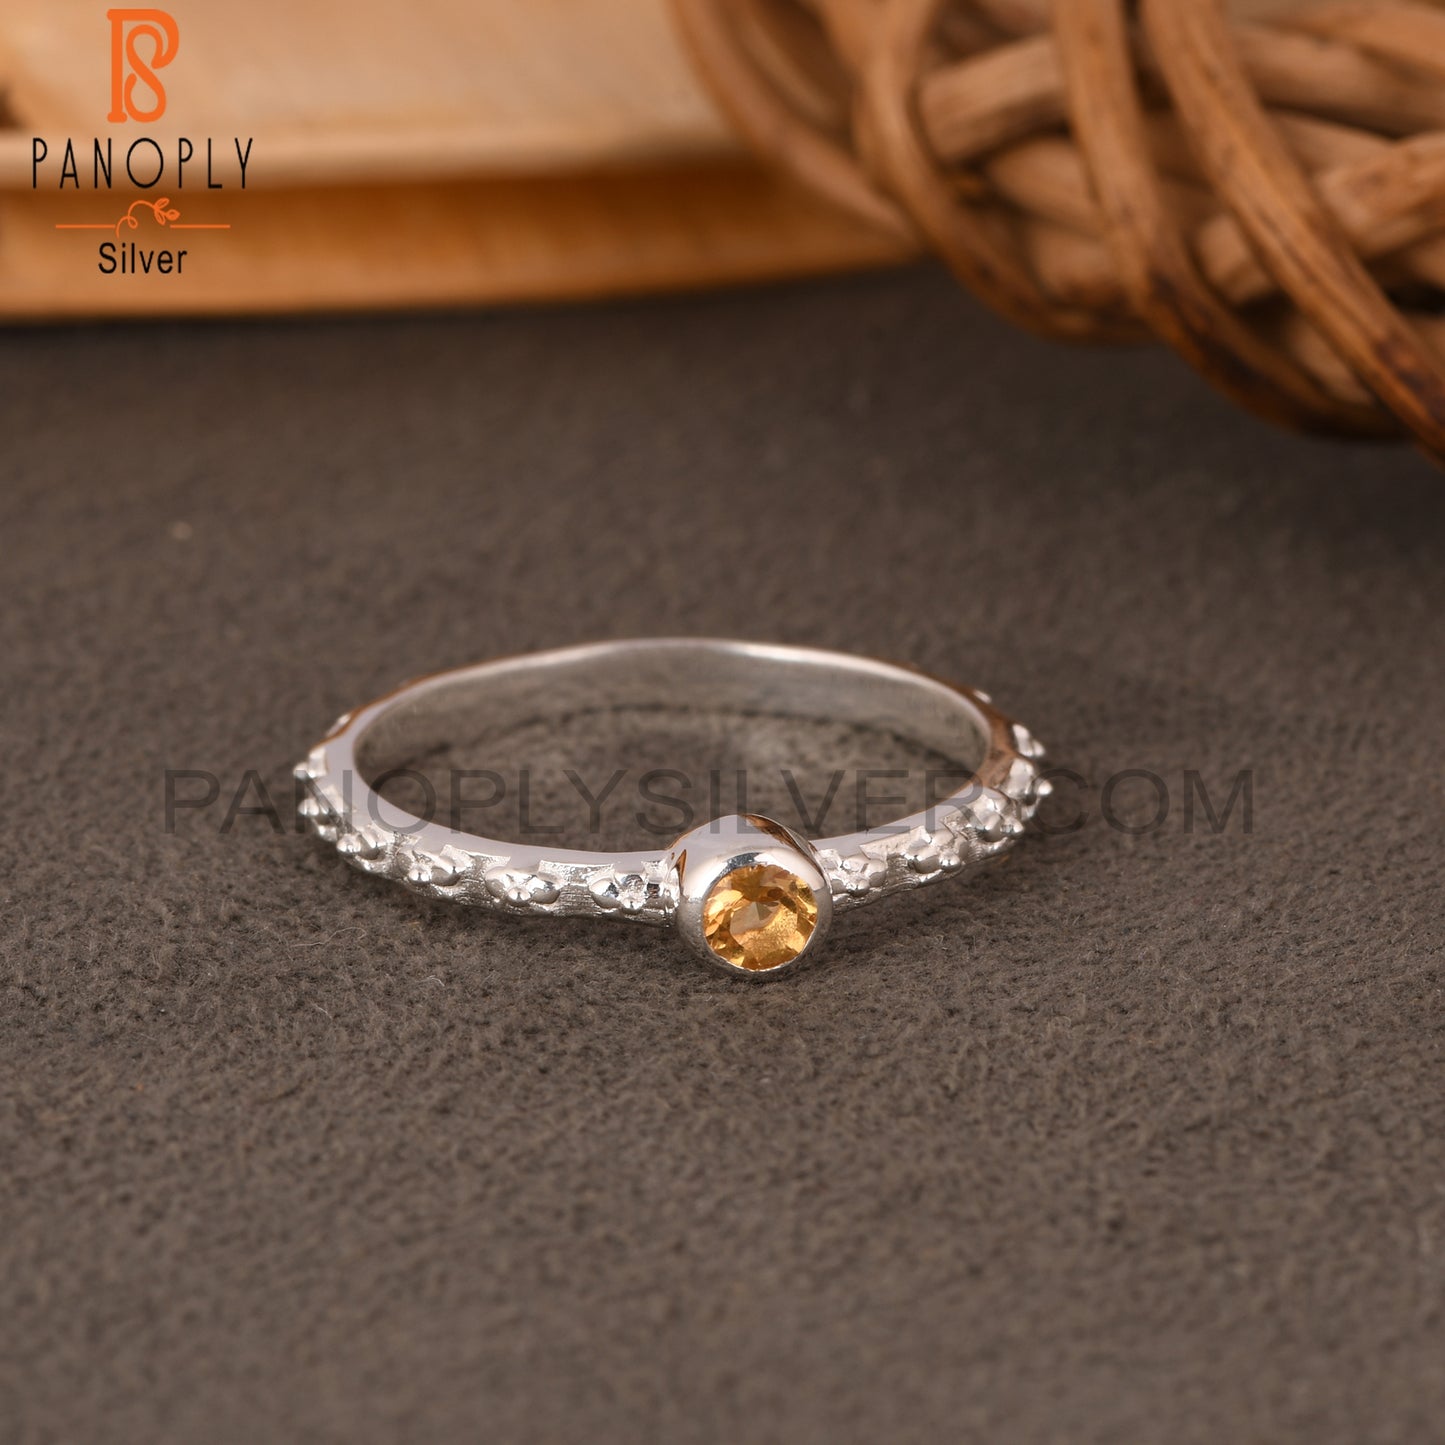 Citrine Round 925 Sterling Silver Ring